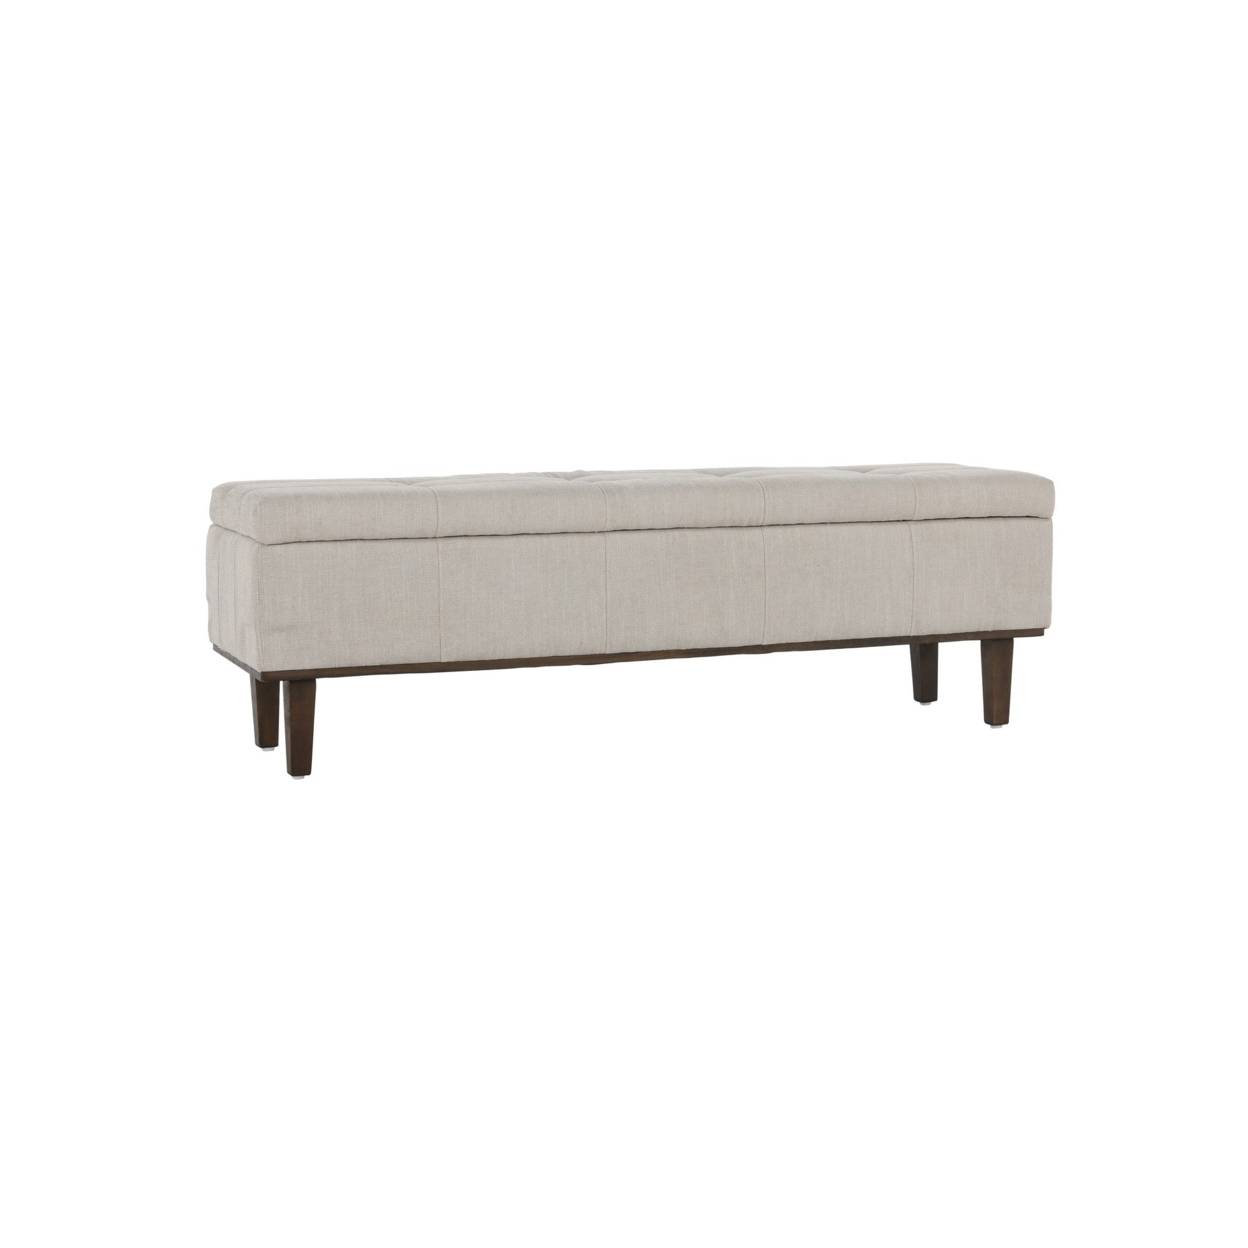 Lou 54 Inch Wood Bench With Storage, Handcrafted, Polyester, Beige- Saltoro Sherpi